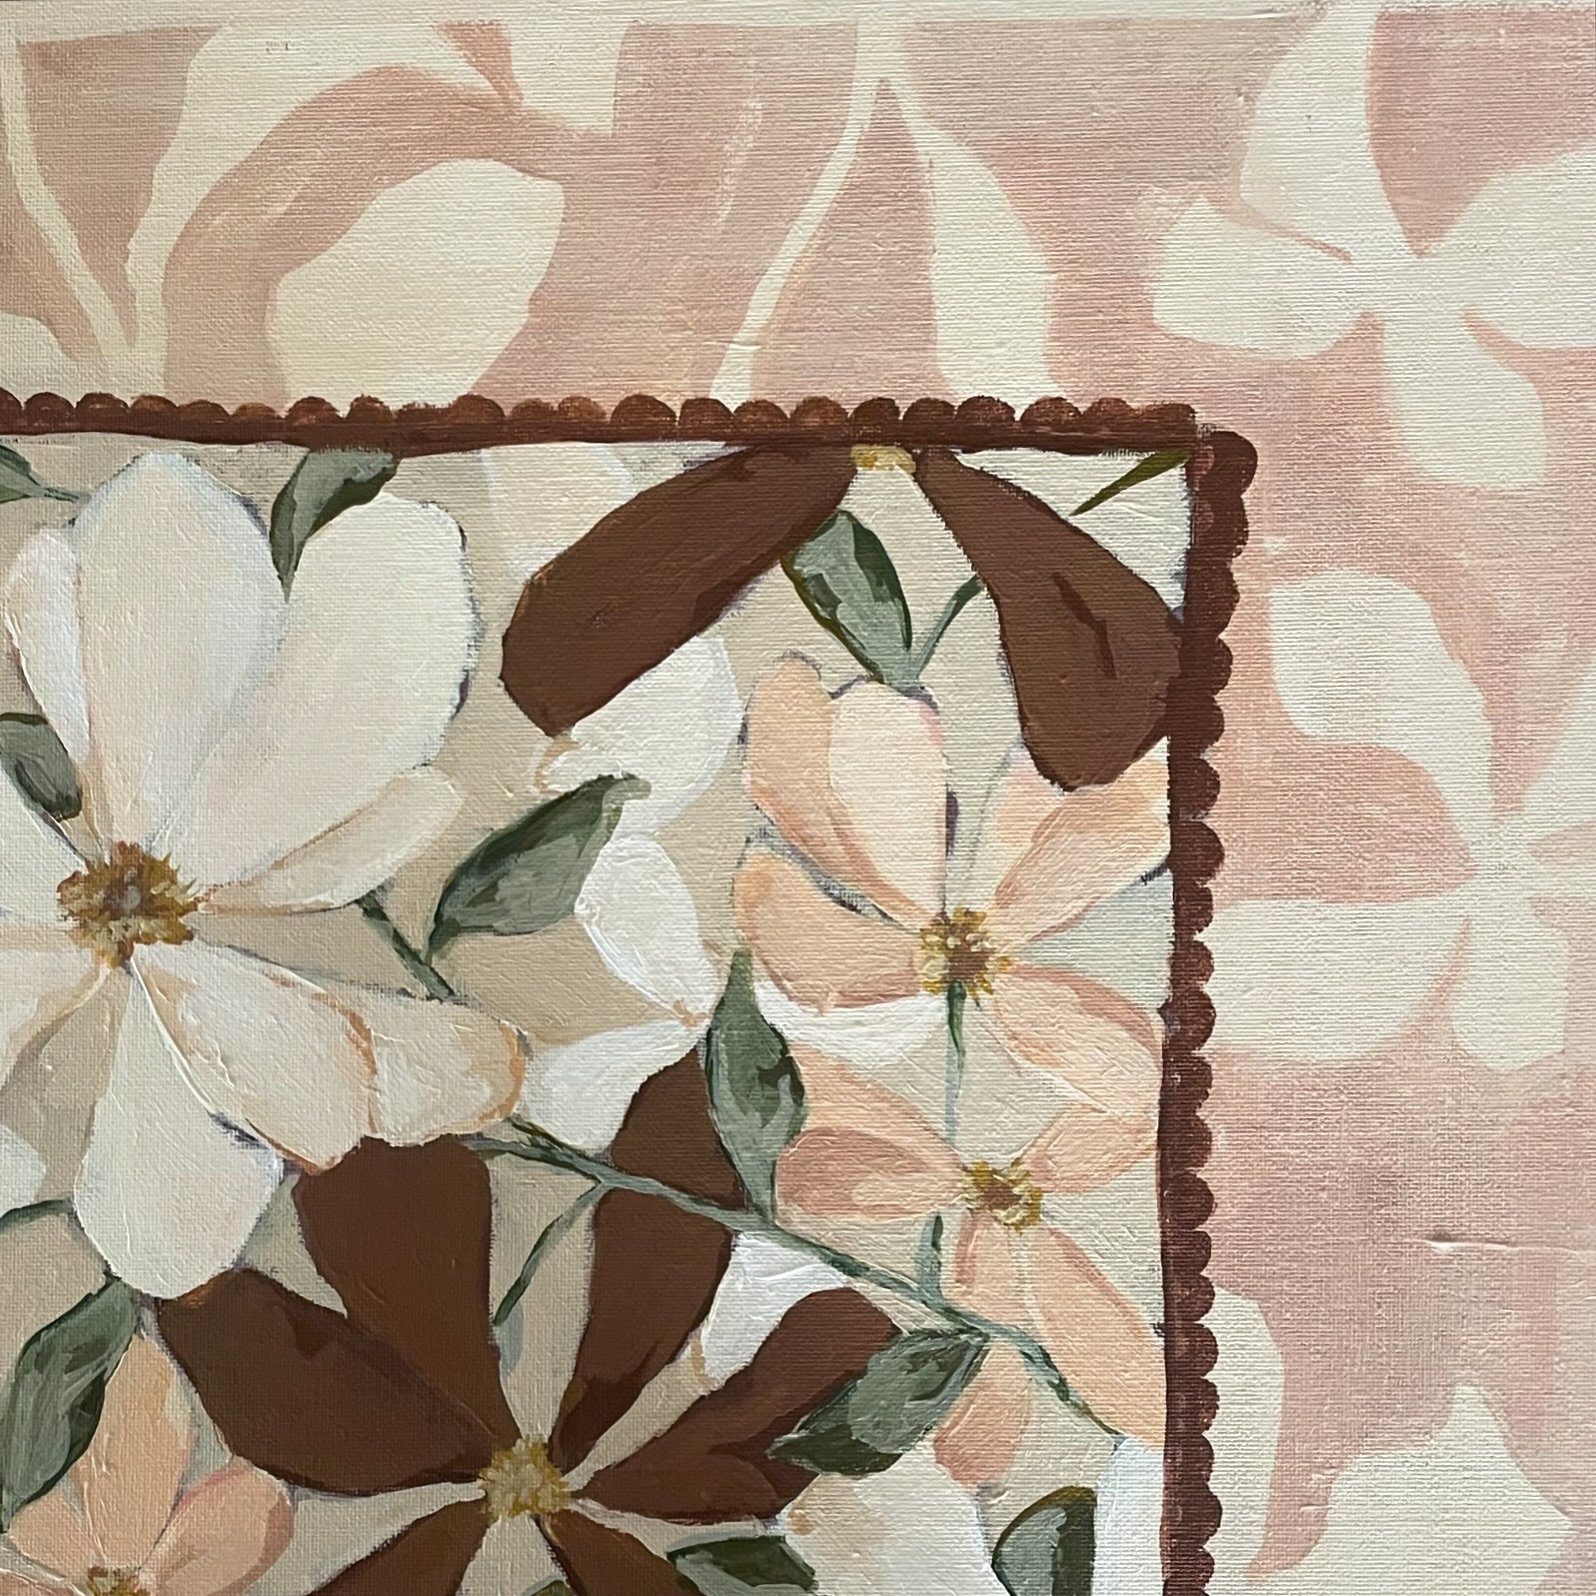 a little snippet of something I&rsquo;m playing with while waiting for babe to arrive ✿ ✿

#emergingartist #geelongartist #bohoart #vintage #handpainted #artforthehome #interiorart #artprocess